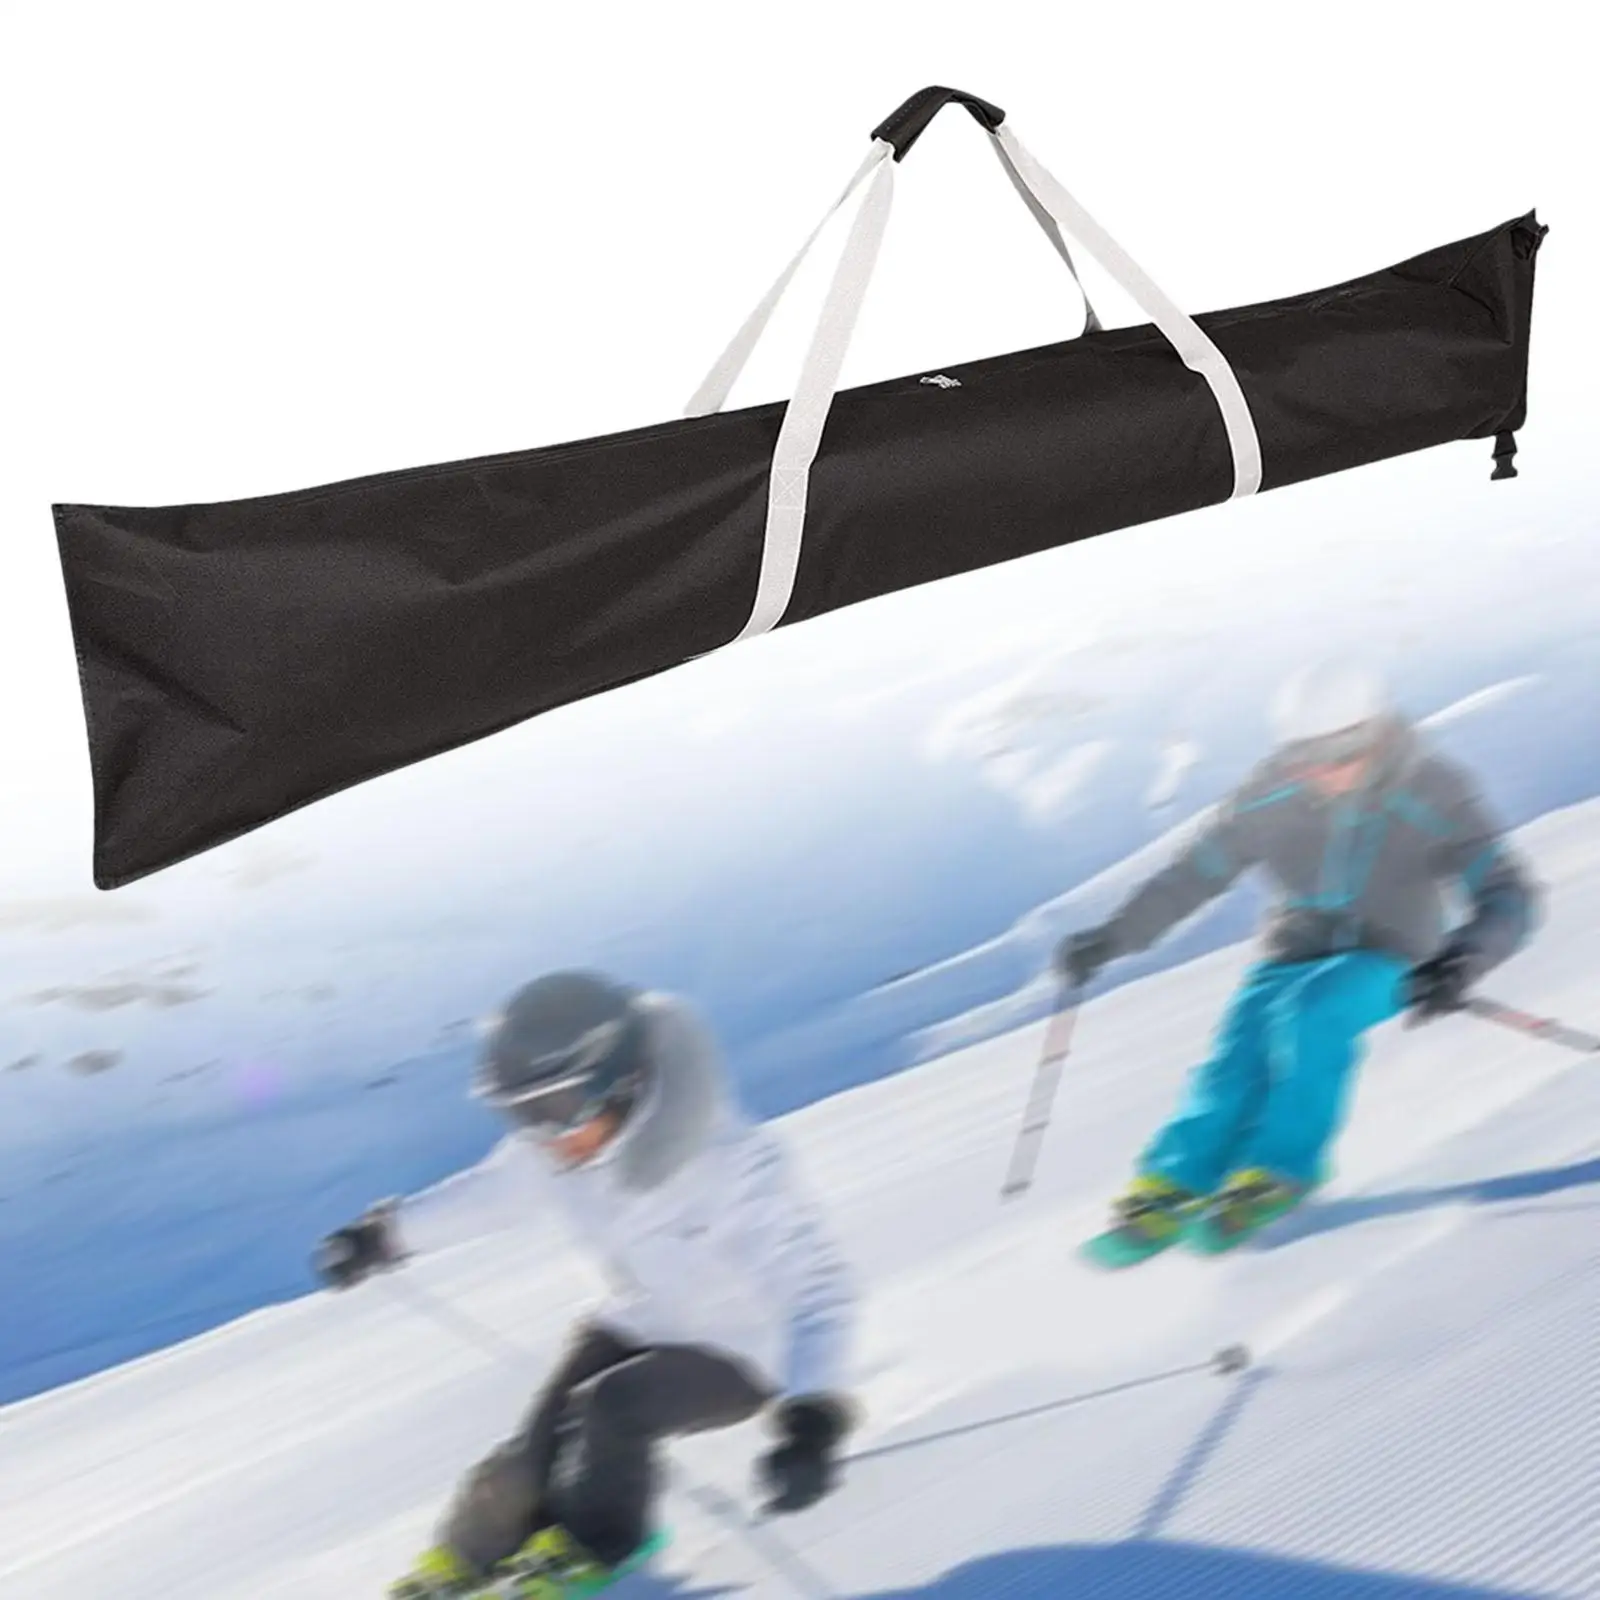 Ski Bag Durable with Handle Transport Portable Snowboards Poles Bag Ski Snowboard Travel Bag for Skiing Outdoor Winter Sports